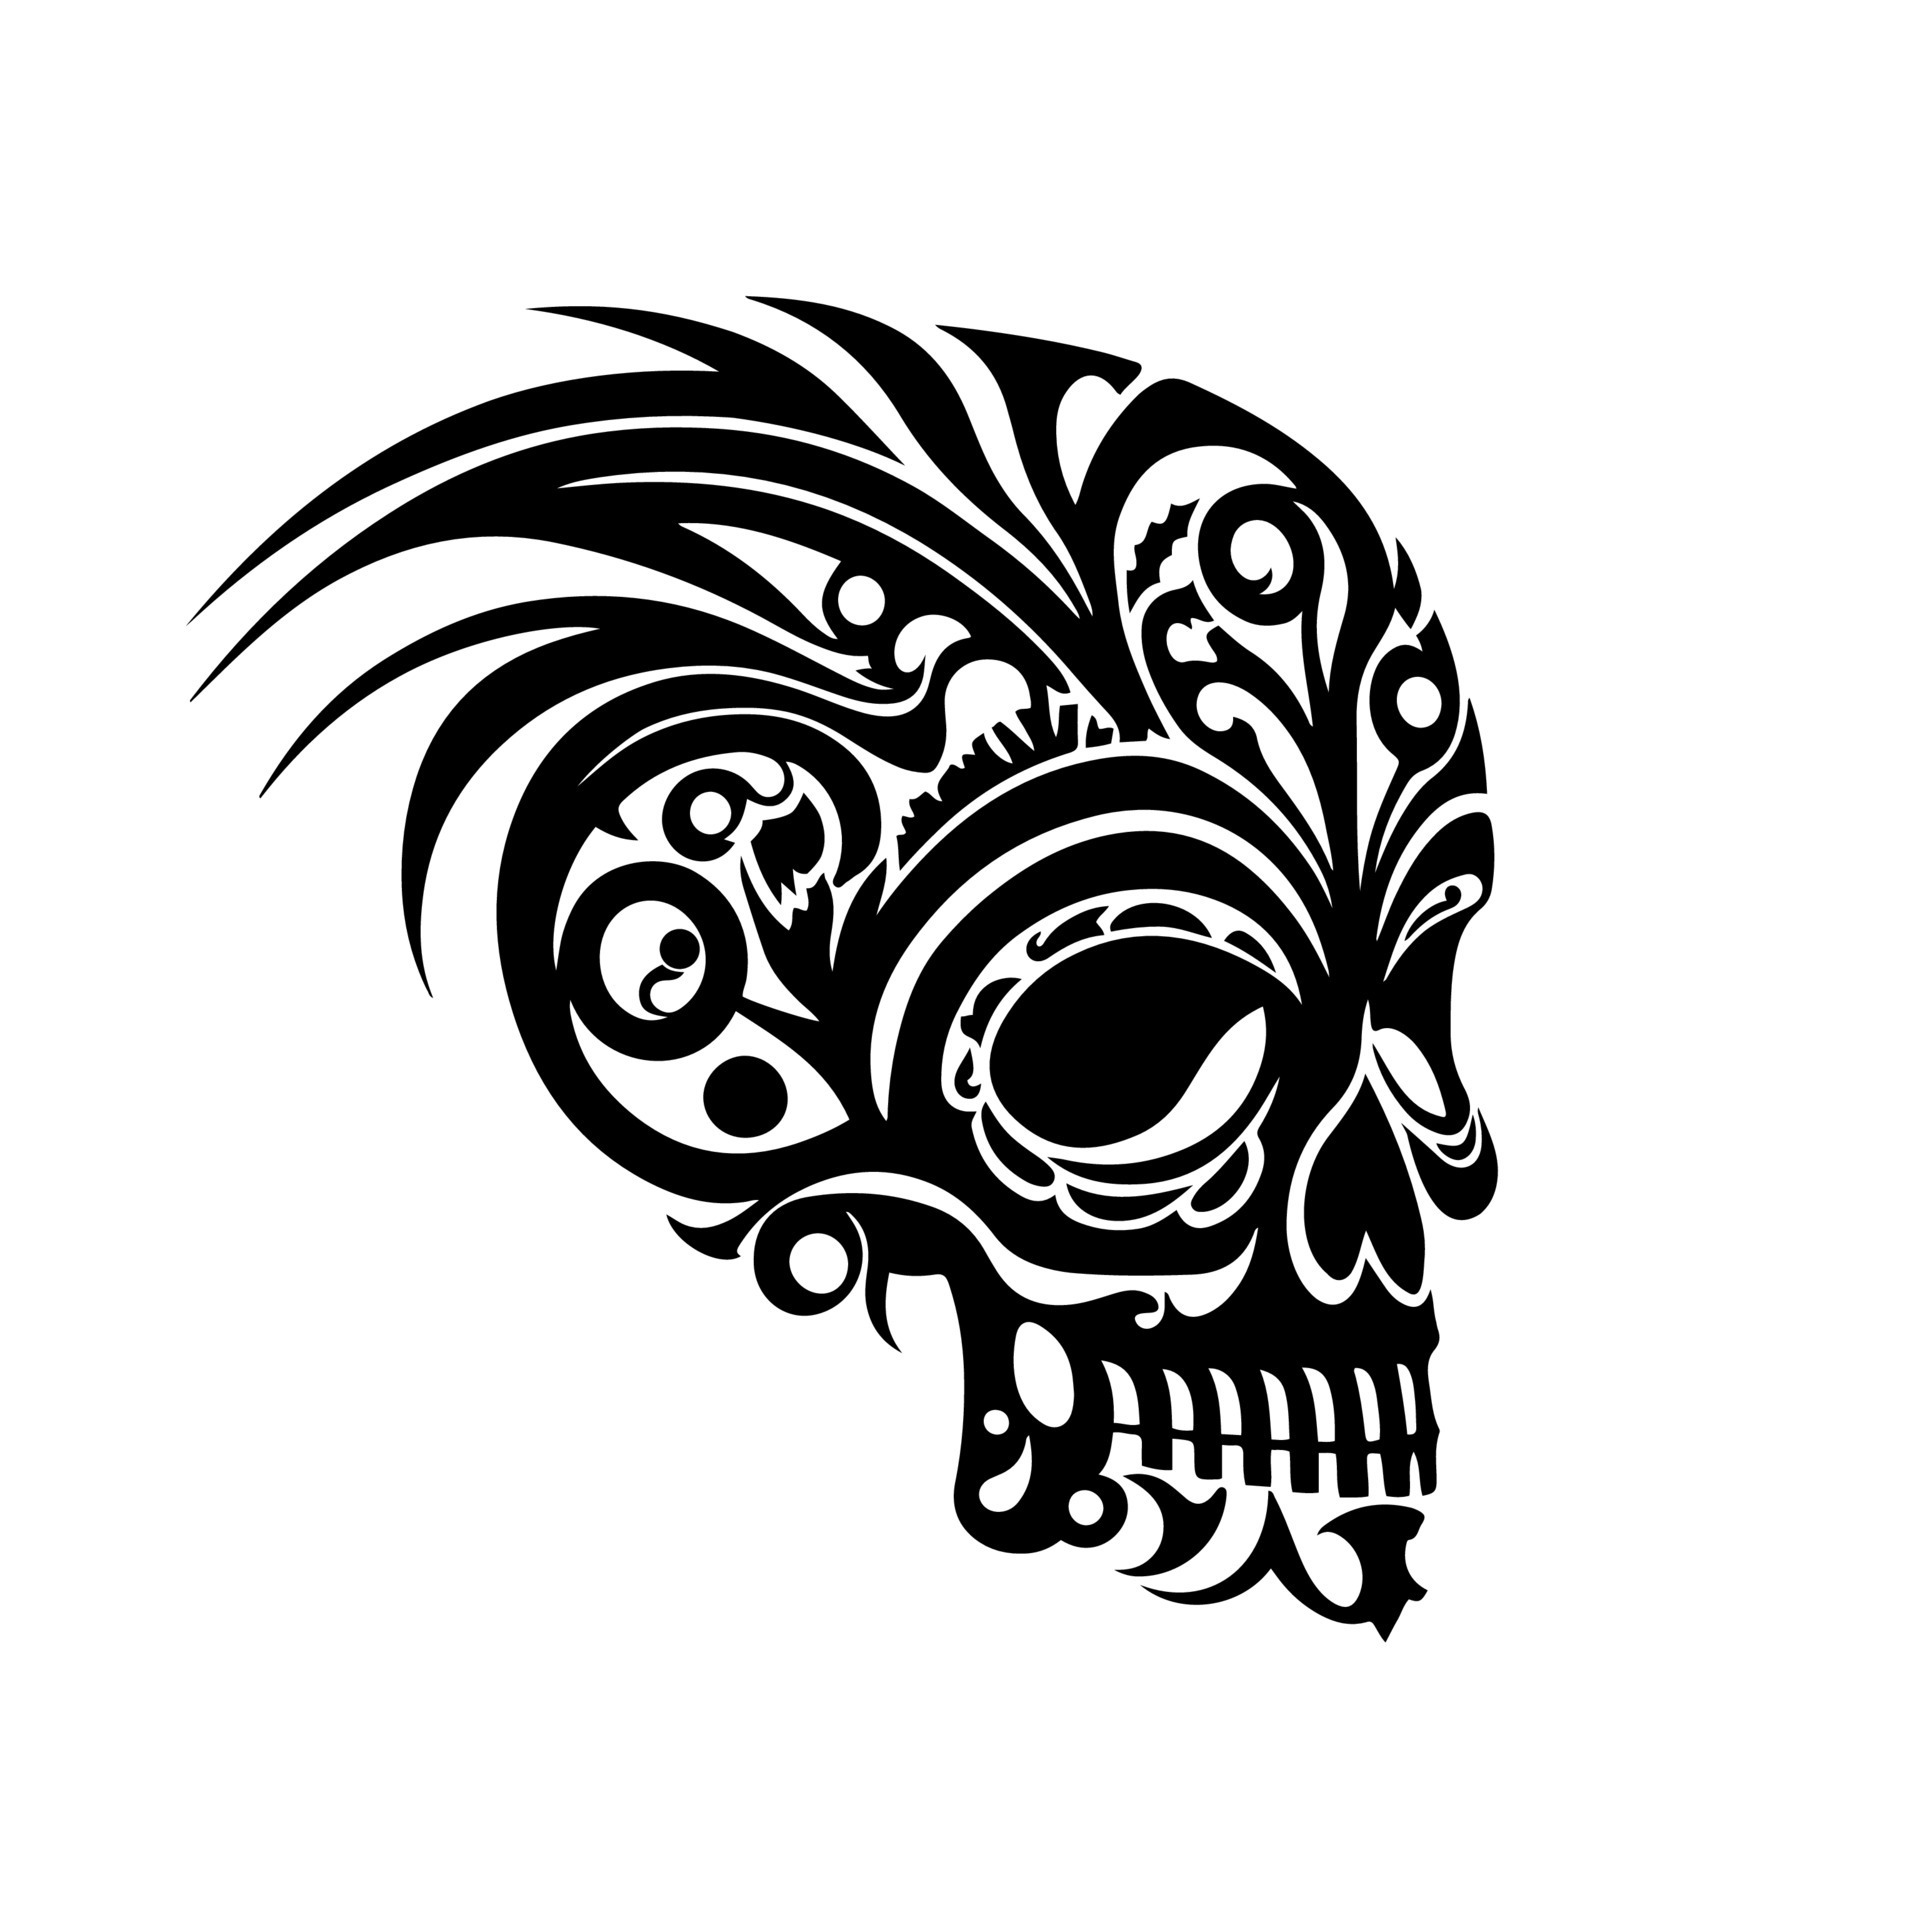 Tribal skull tattoo design, black and white vector illustration isolated on white background. Ideal for tattoo parlors, biker clubs, and other related designs. 23052082 Vector Art at Vecteezy